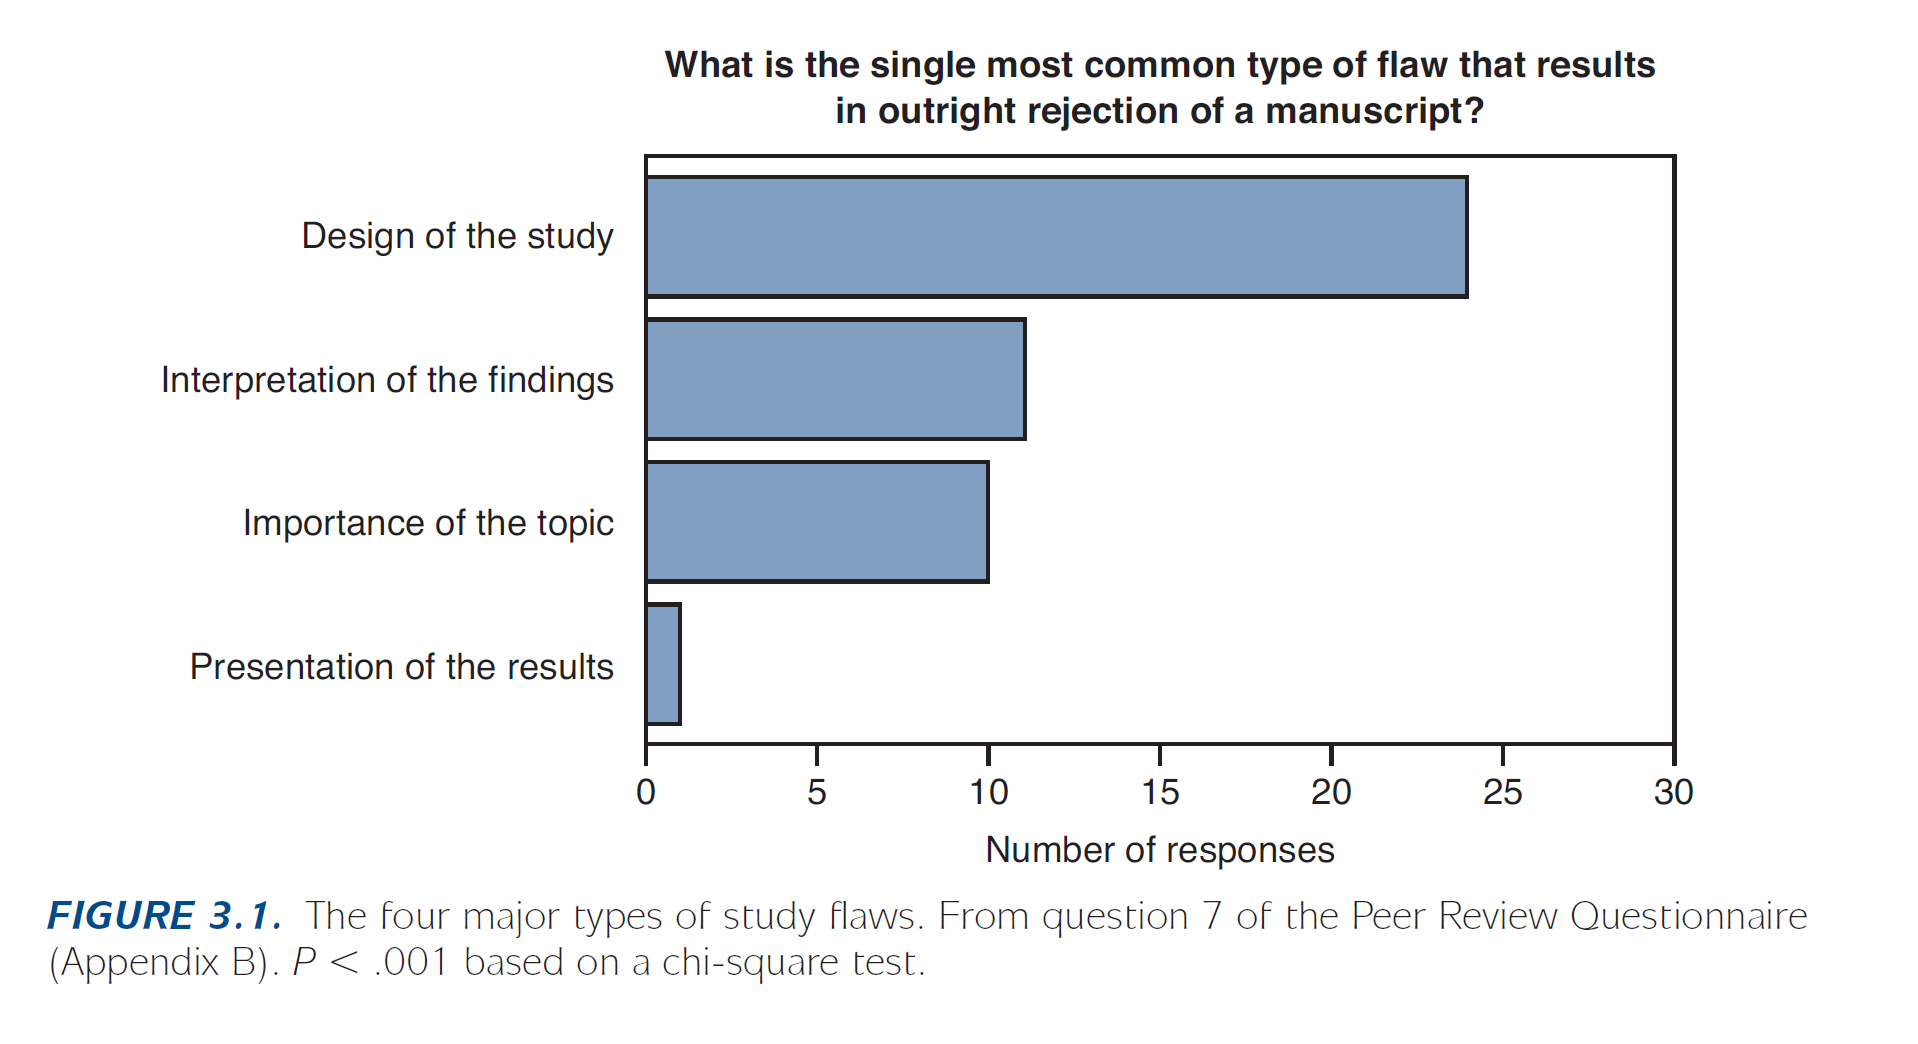 Bar graph of the most common study flaws